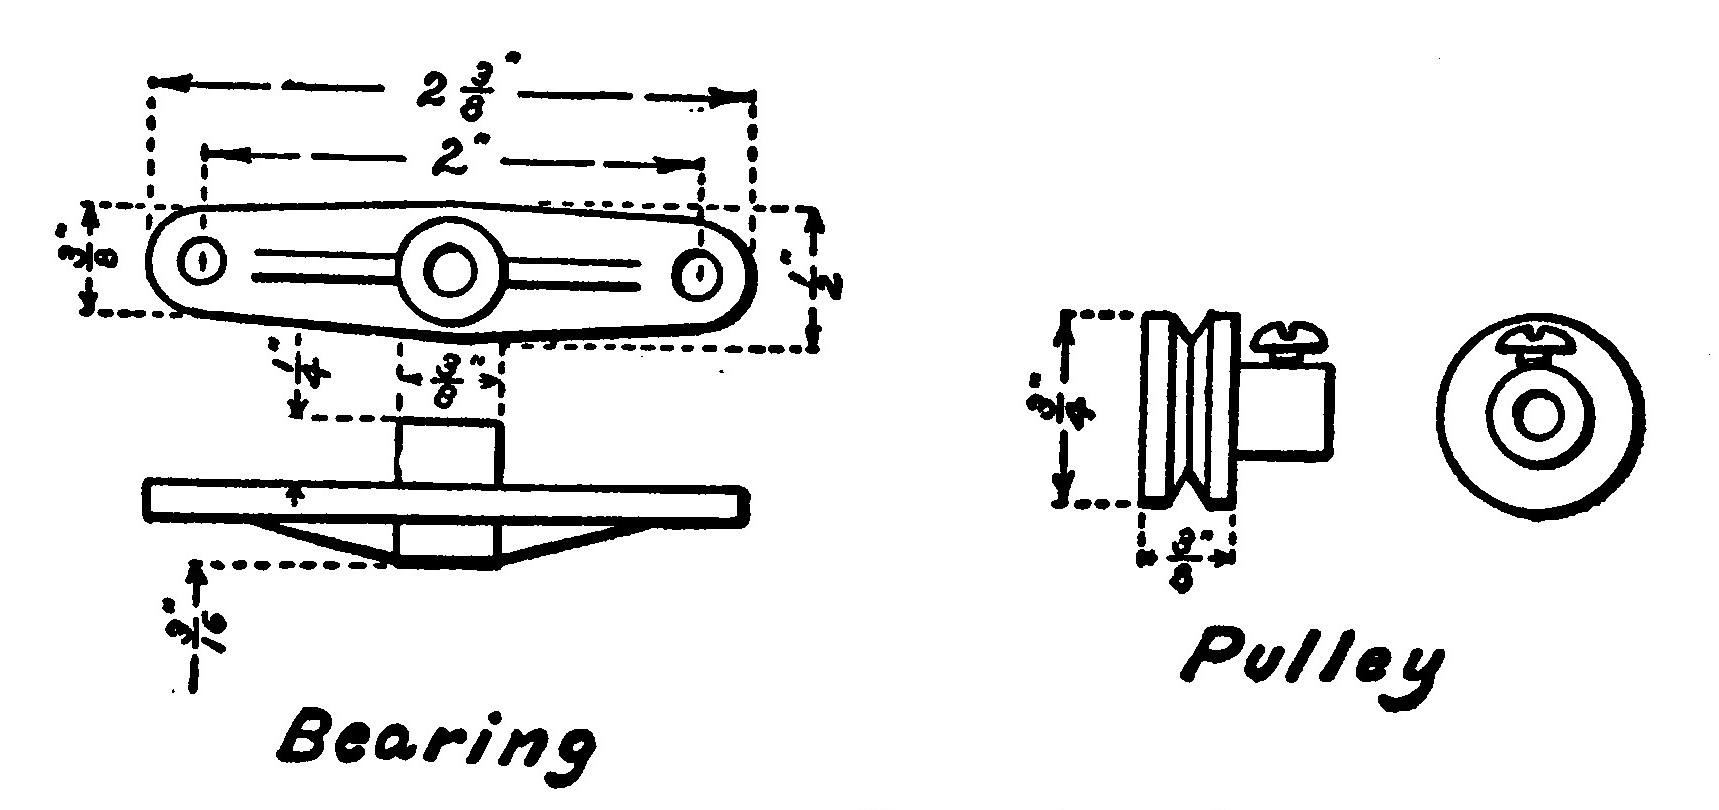 Fig. 260.—The Pulley and Bearings.